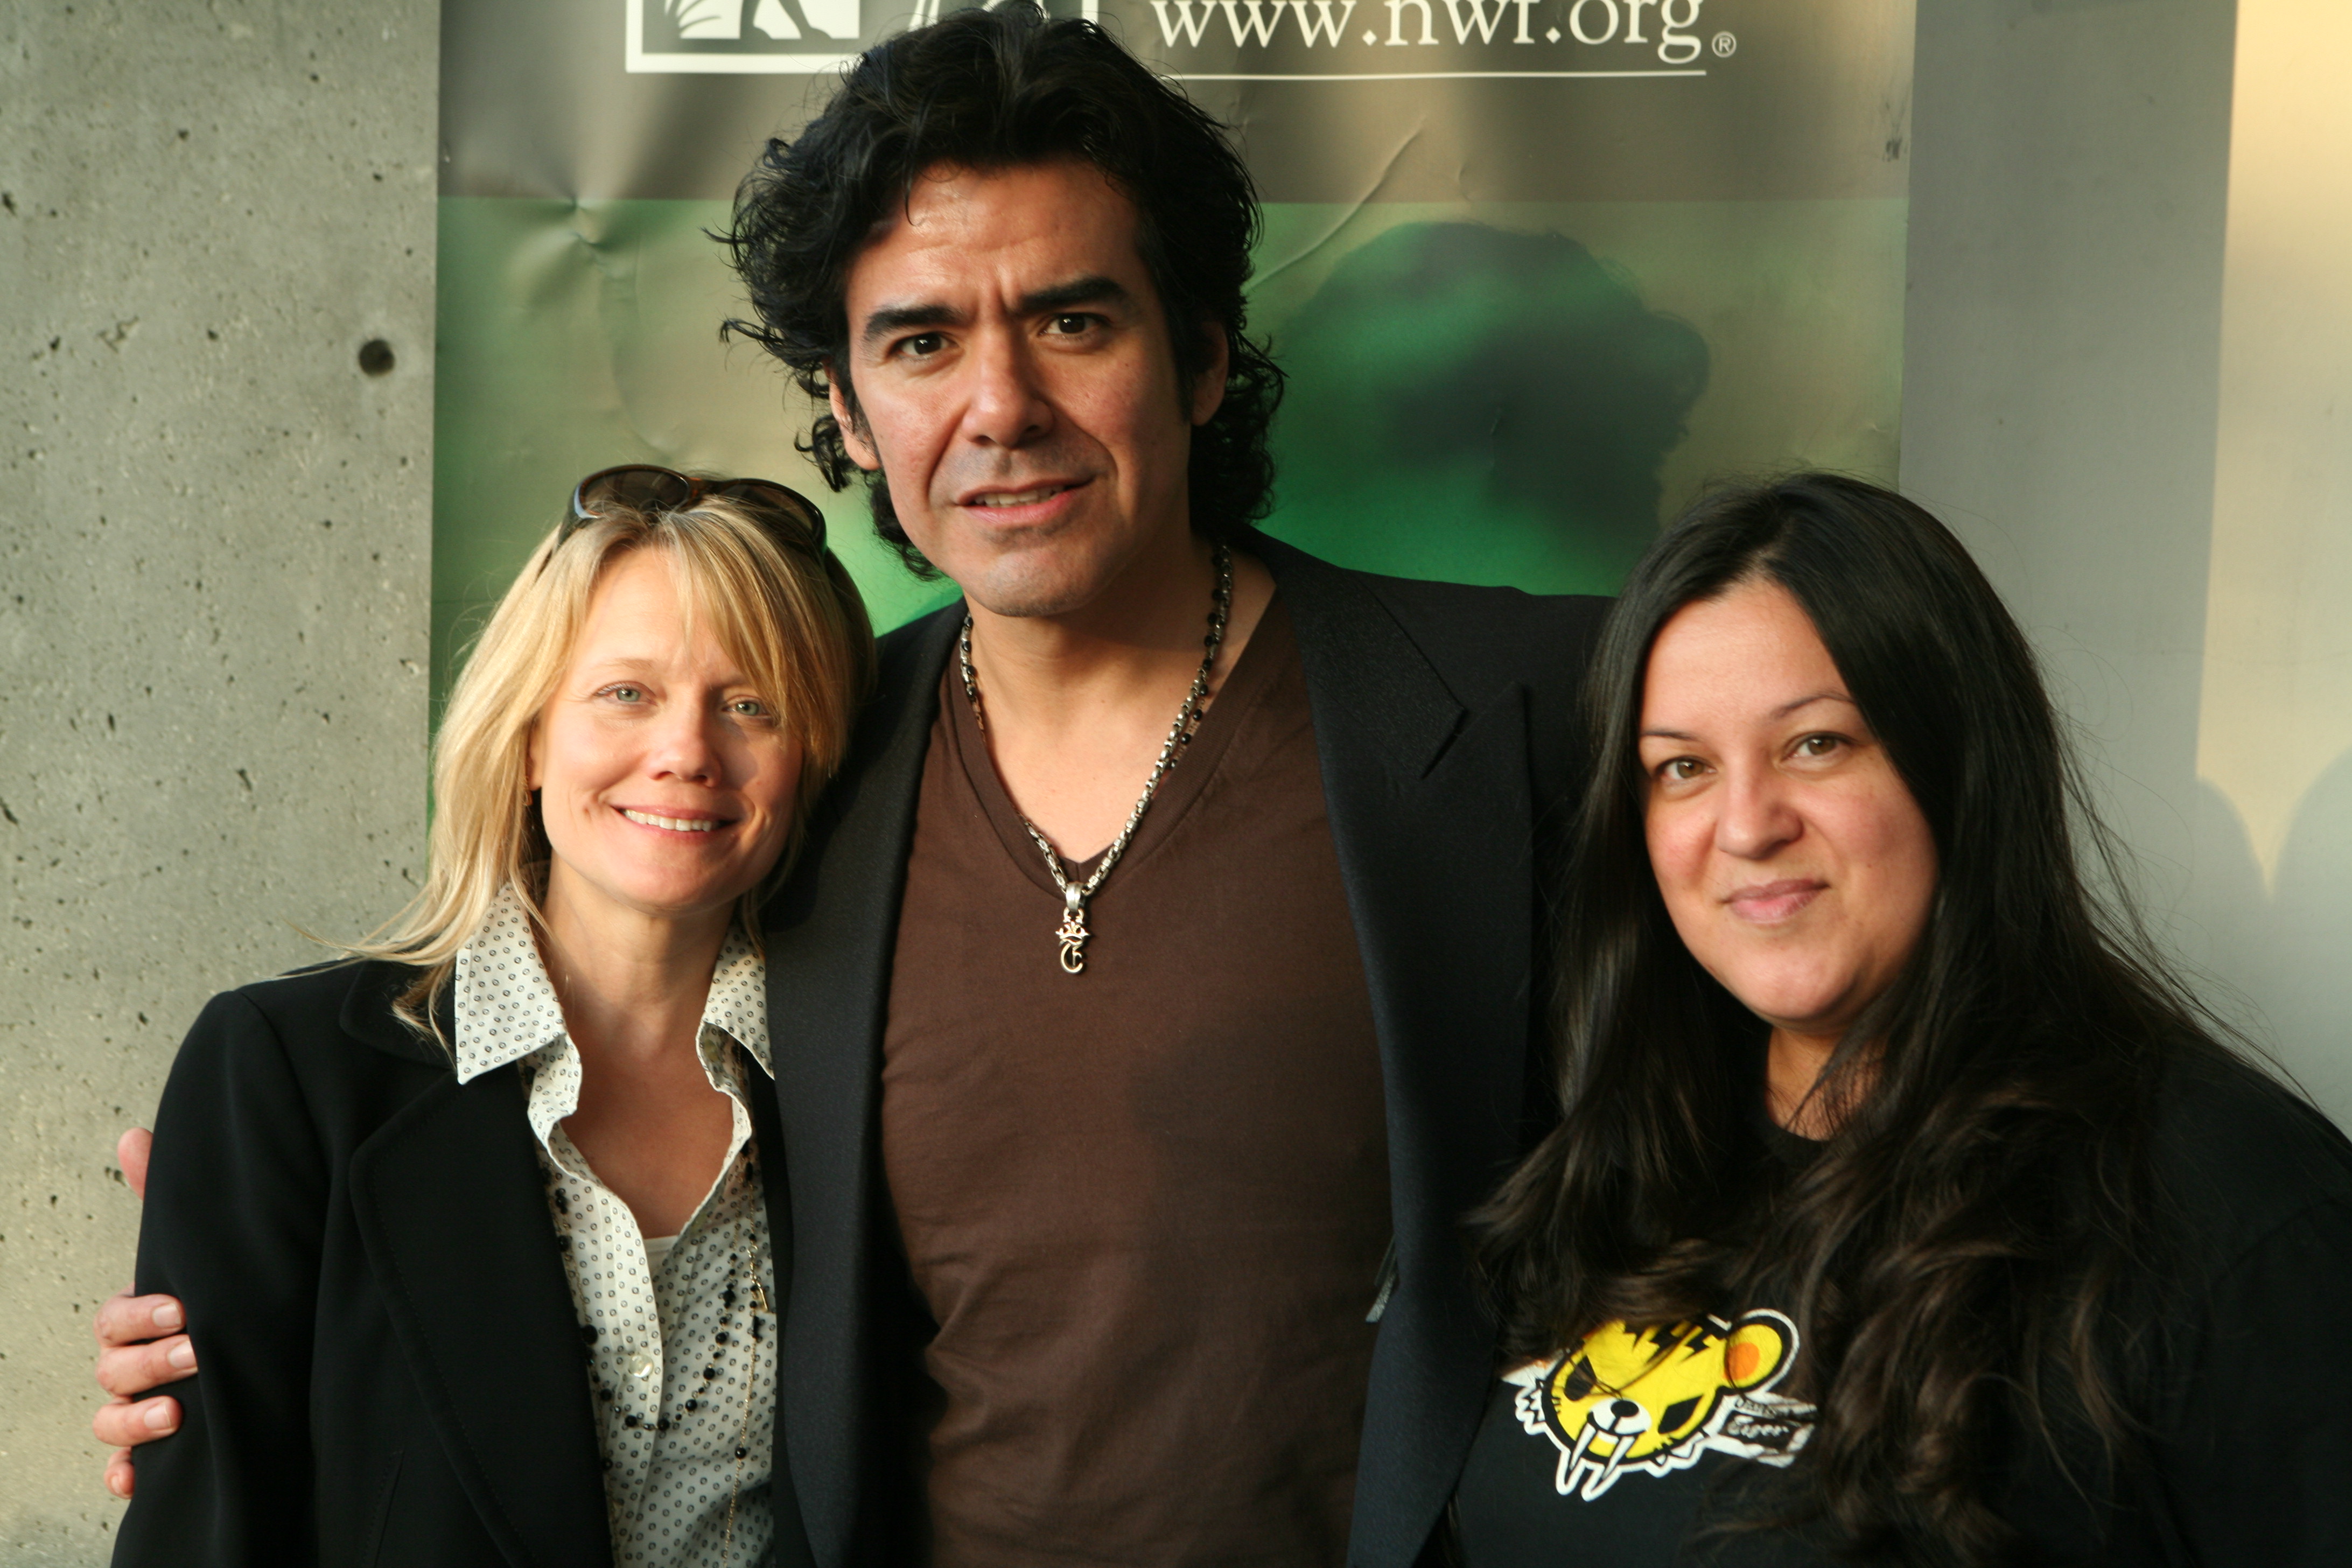 Carey Stanton, Jose Yenque and Producer Melinda Esquibel on the set of National Wildlife Federation's Campus Chillout!